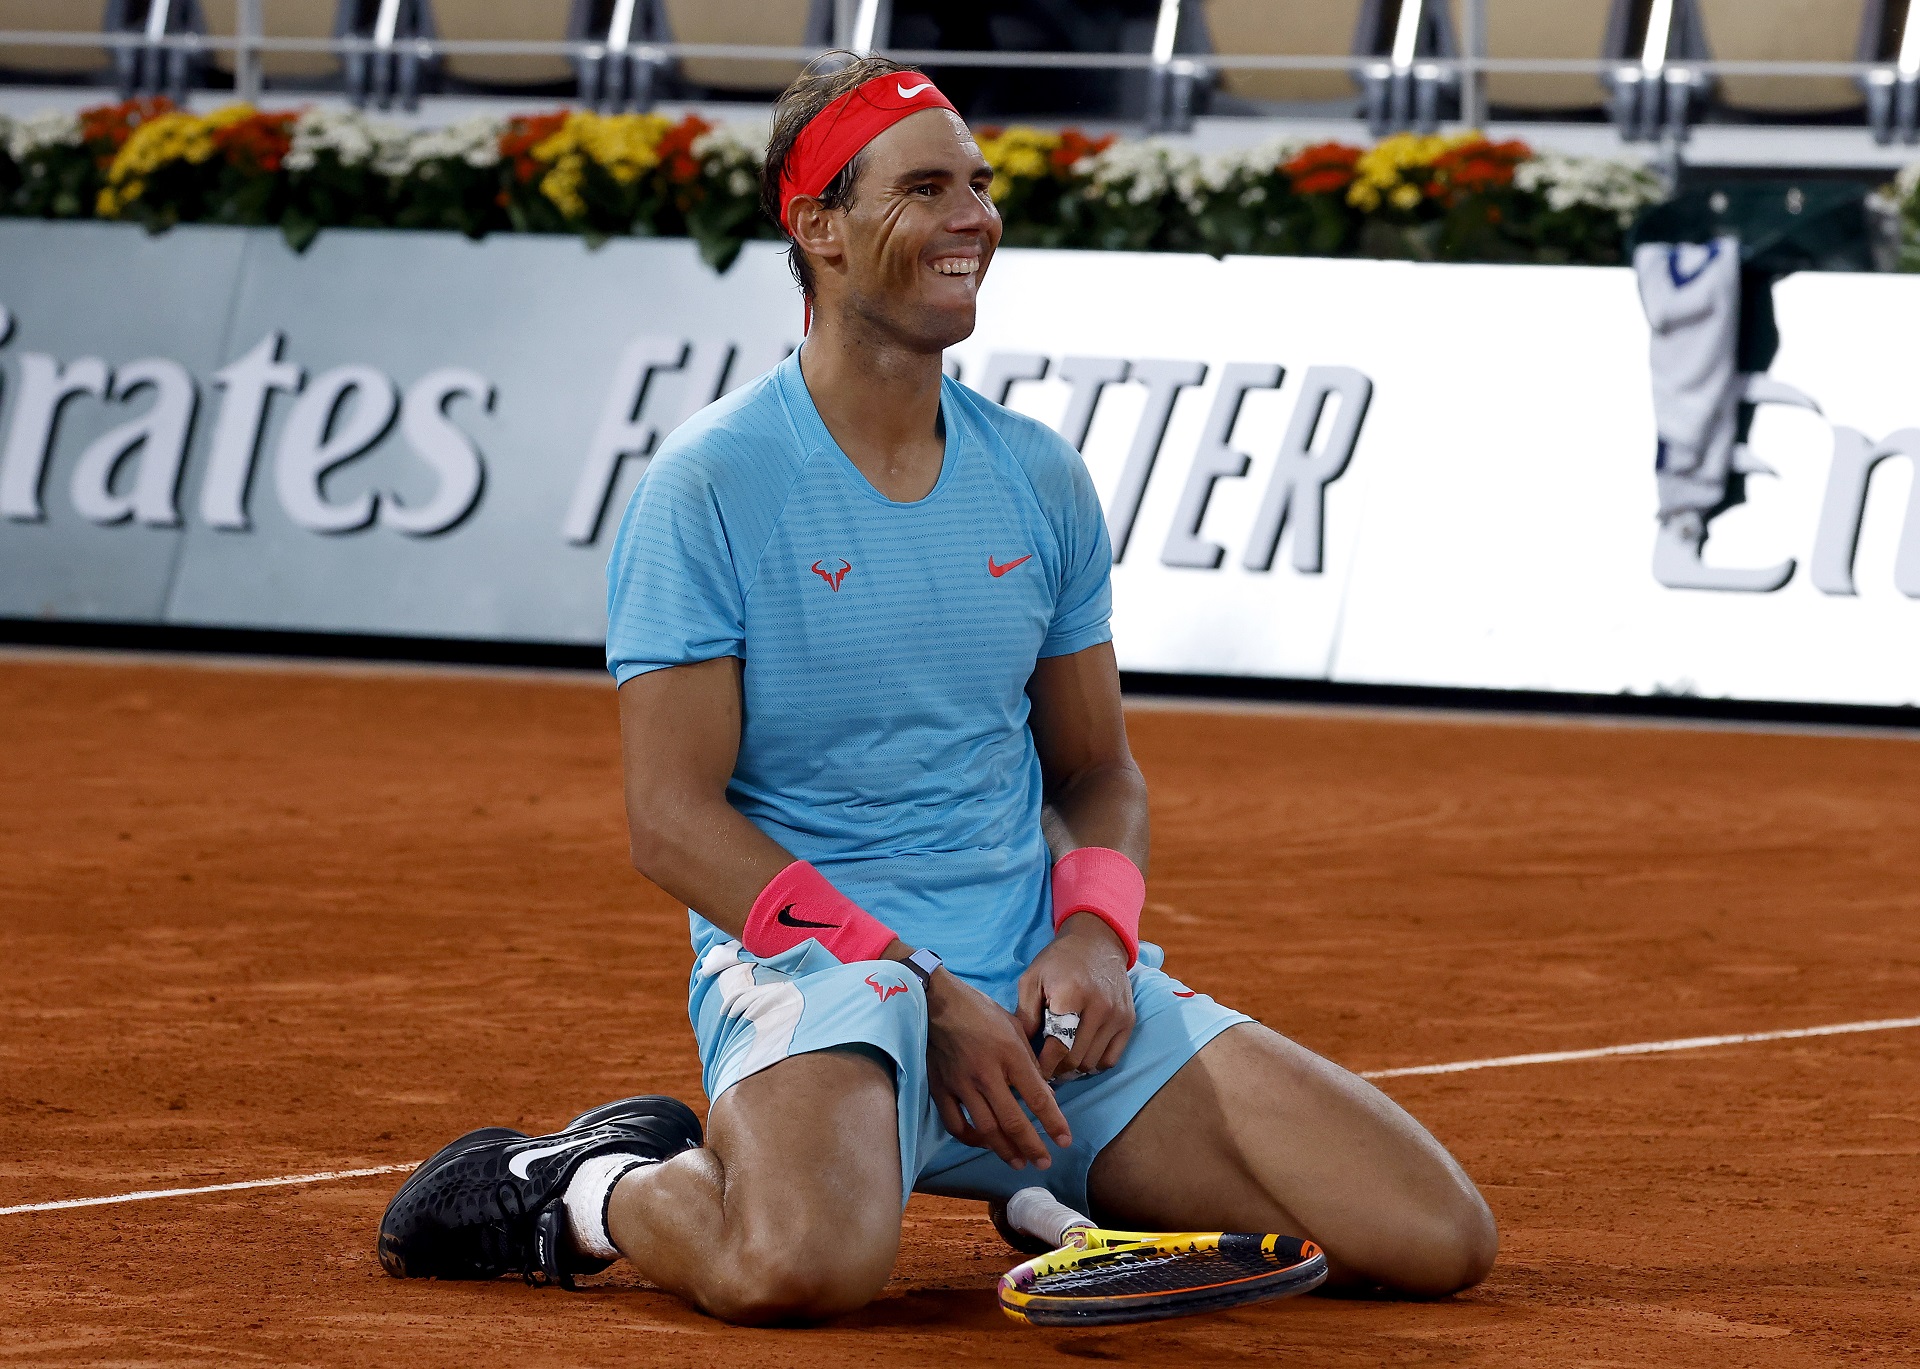 epa08736002 Rafael Nadal of Spain reacts after winning against Novak Djokovic of Serbia in their men’s final match during the French Open tennis tournament at Roland ​Garros in Paris, France, 11 October 2020.  EPA/YOAN VALAT